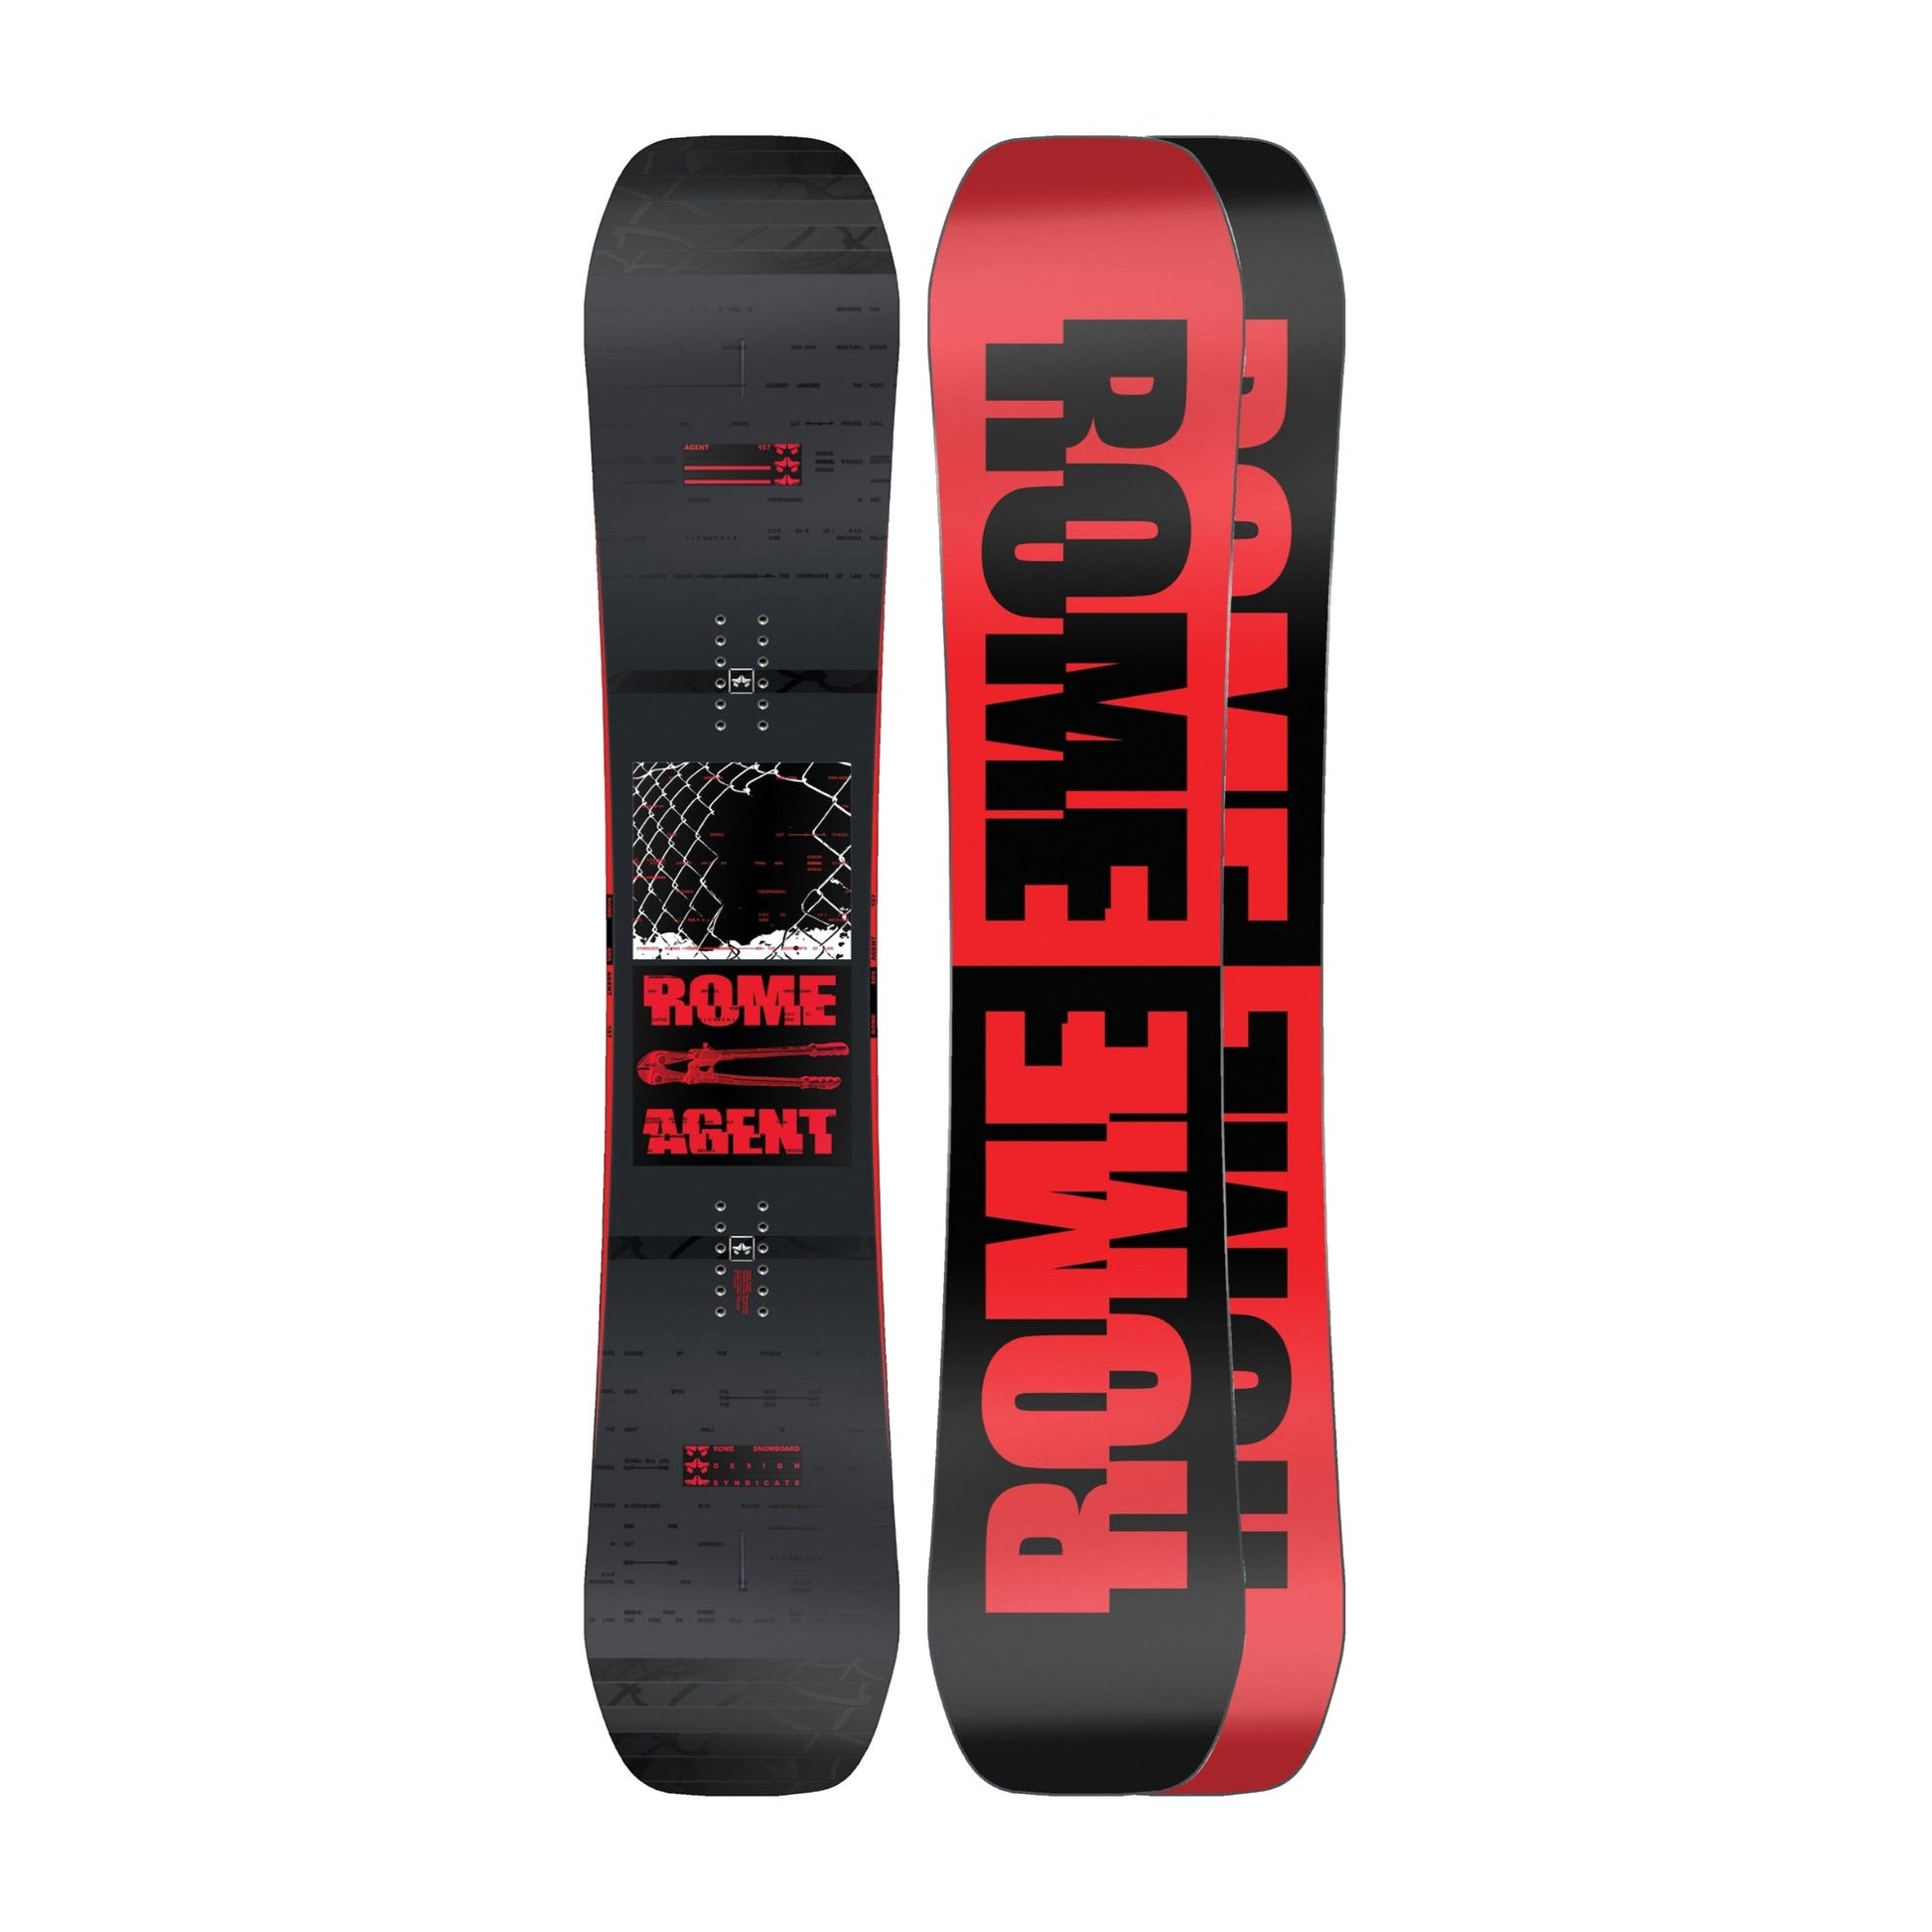 Rome Agent Snowboards 157 Snowboards